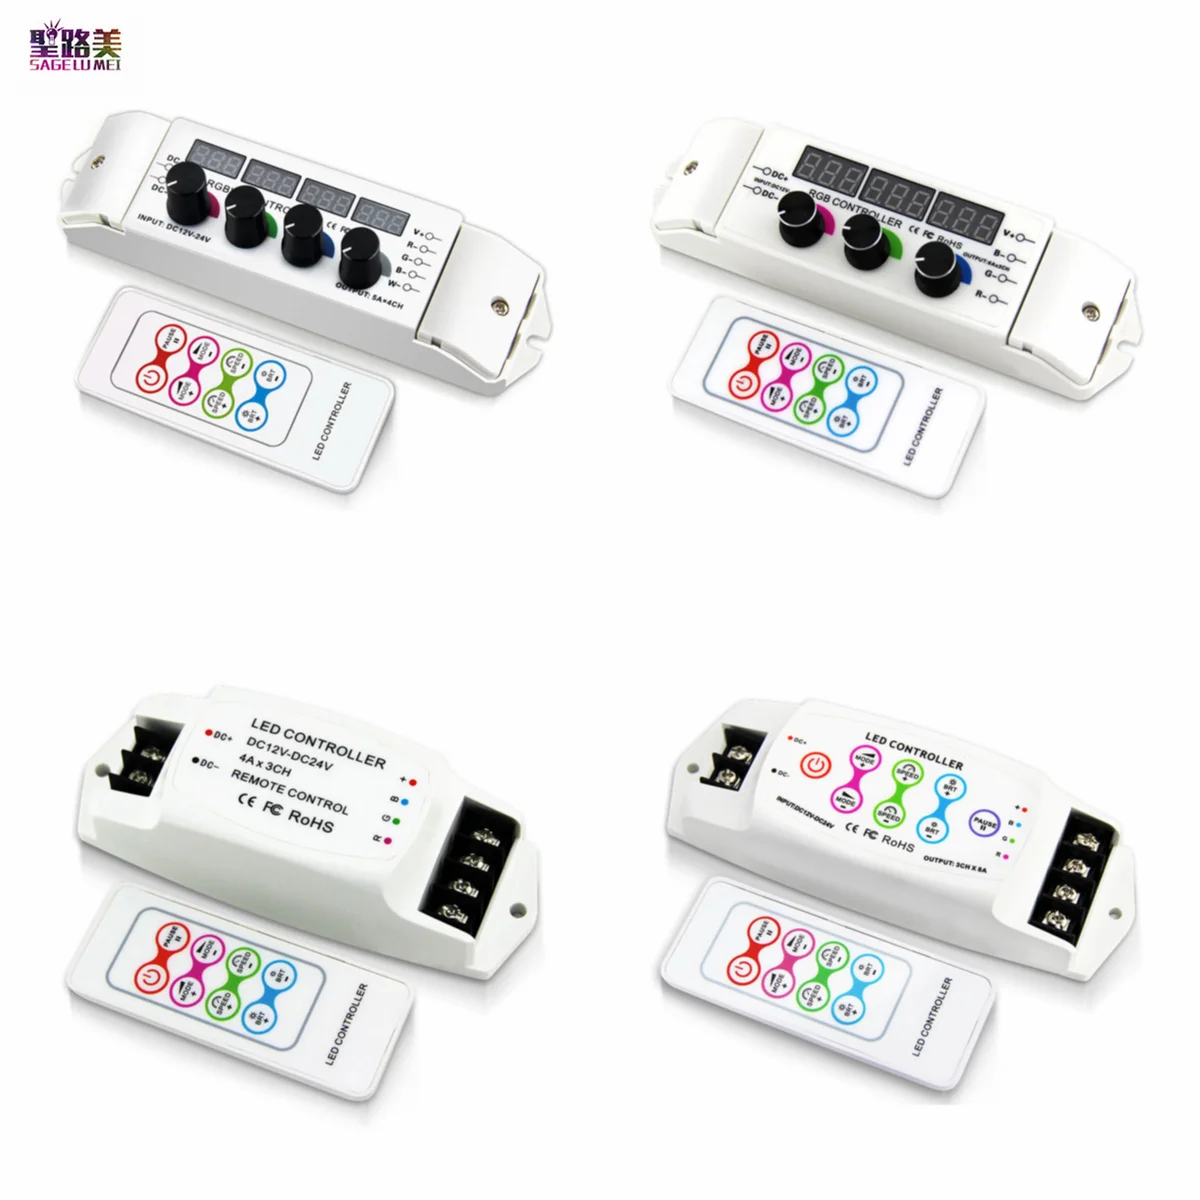 DC12V-24V RGBW RGB Controller with RF Wireless Remote Knob For 5050 3528 2835 3CH 4CH Channel LED Strip Lights Tape Ribbon